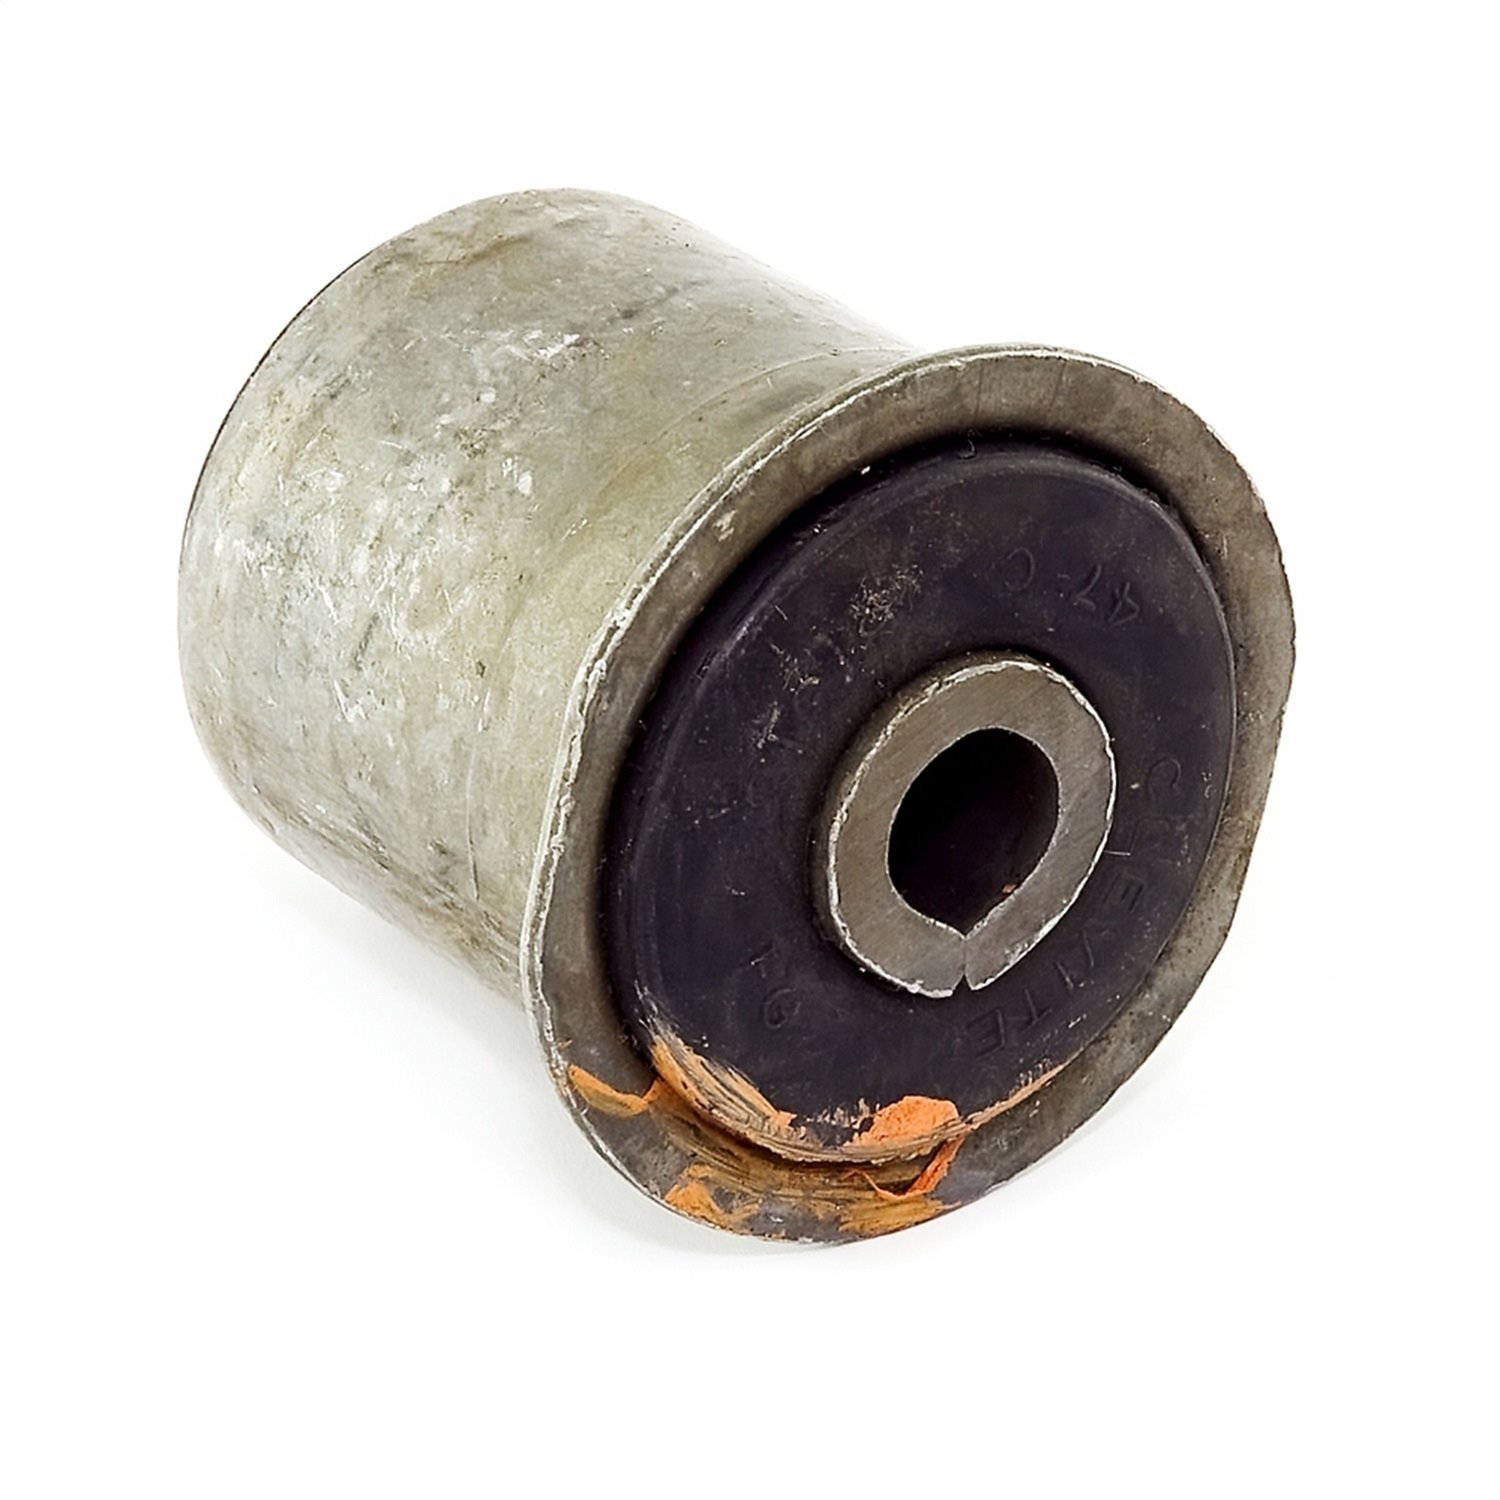 Replacement rear lower control arm bushing from Omix-ADA,